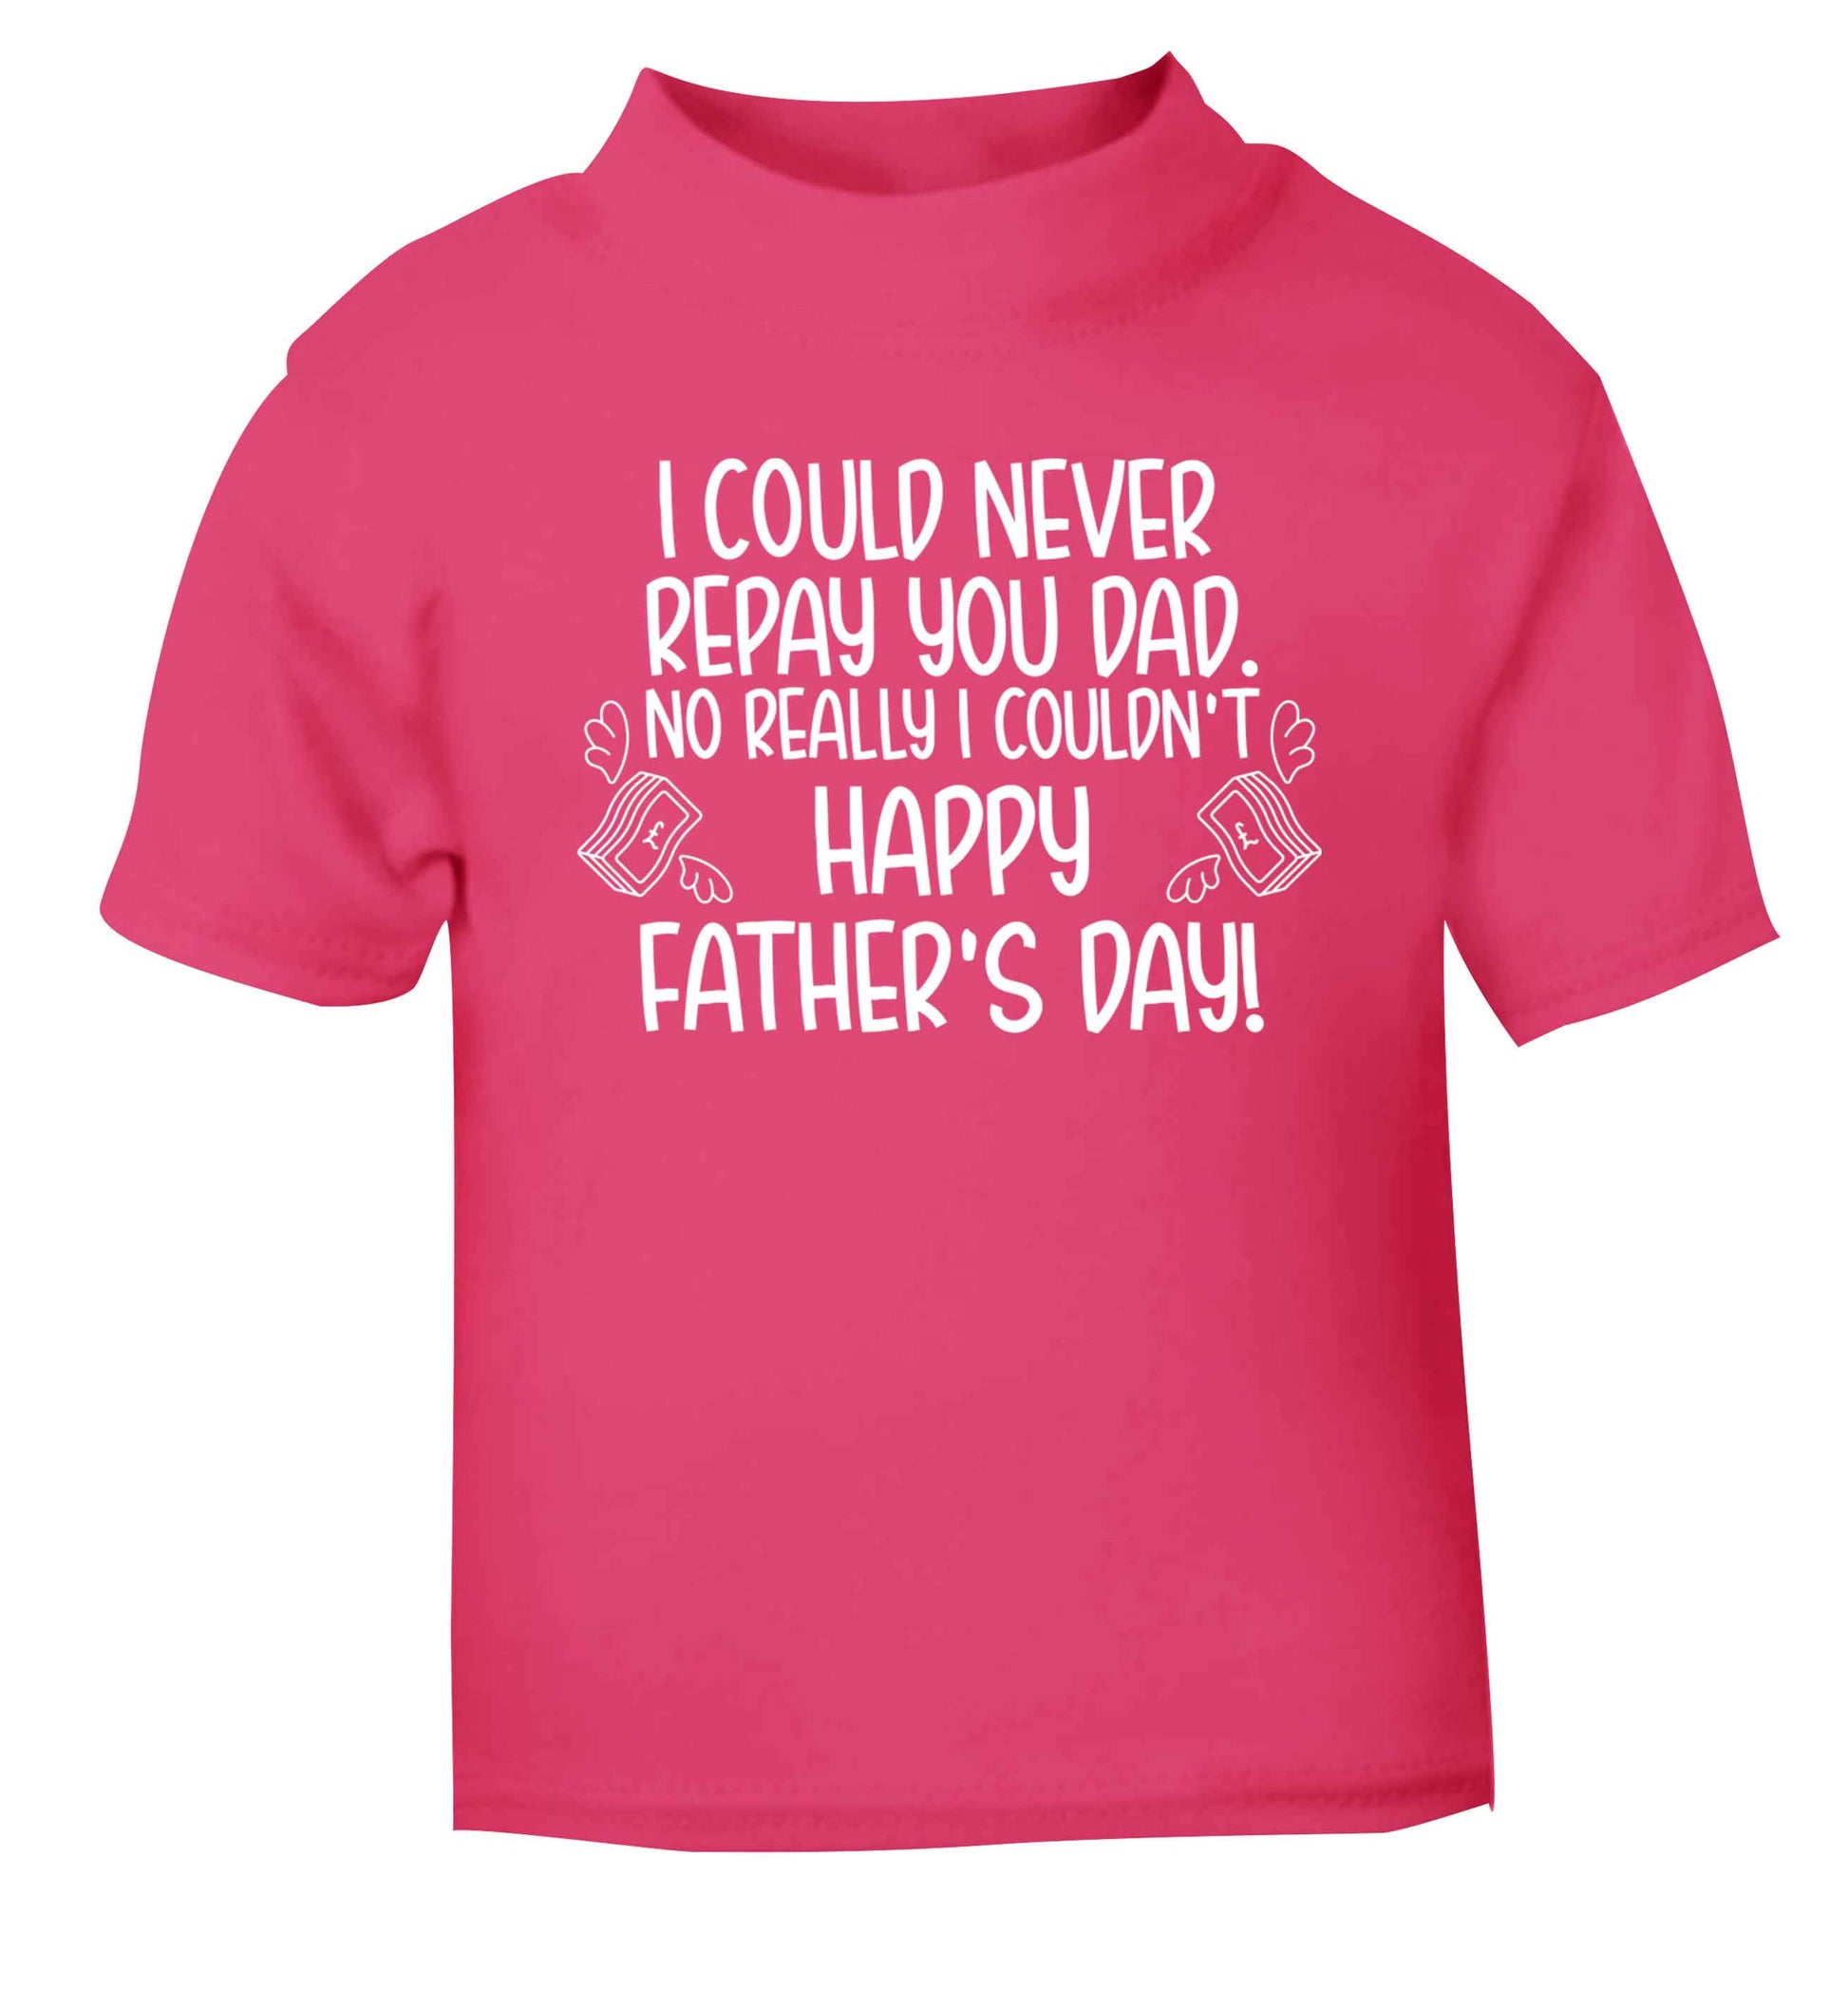 I could never repay you dad. No I really couldn't happy Father's day! pink baby toddler Tshirt 2 Years